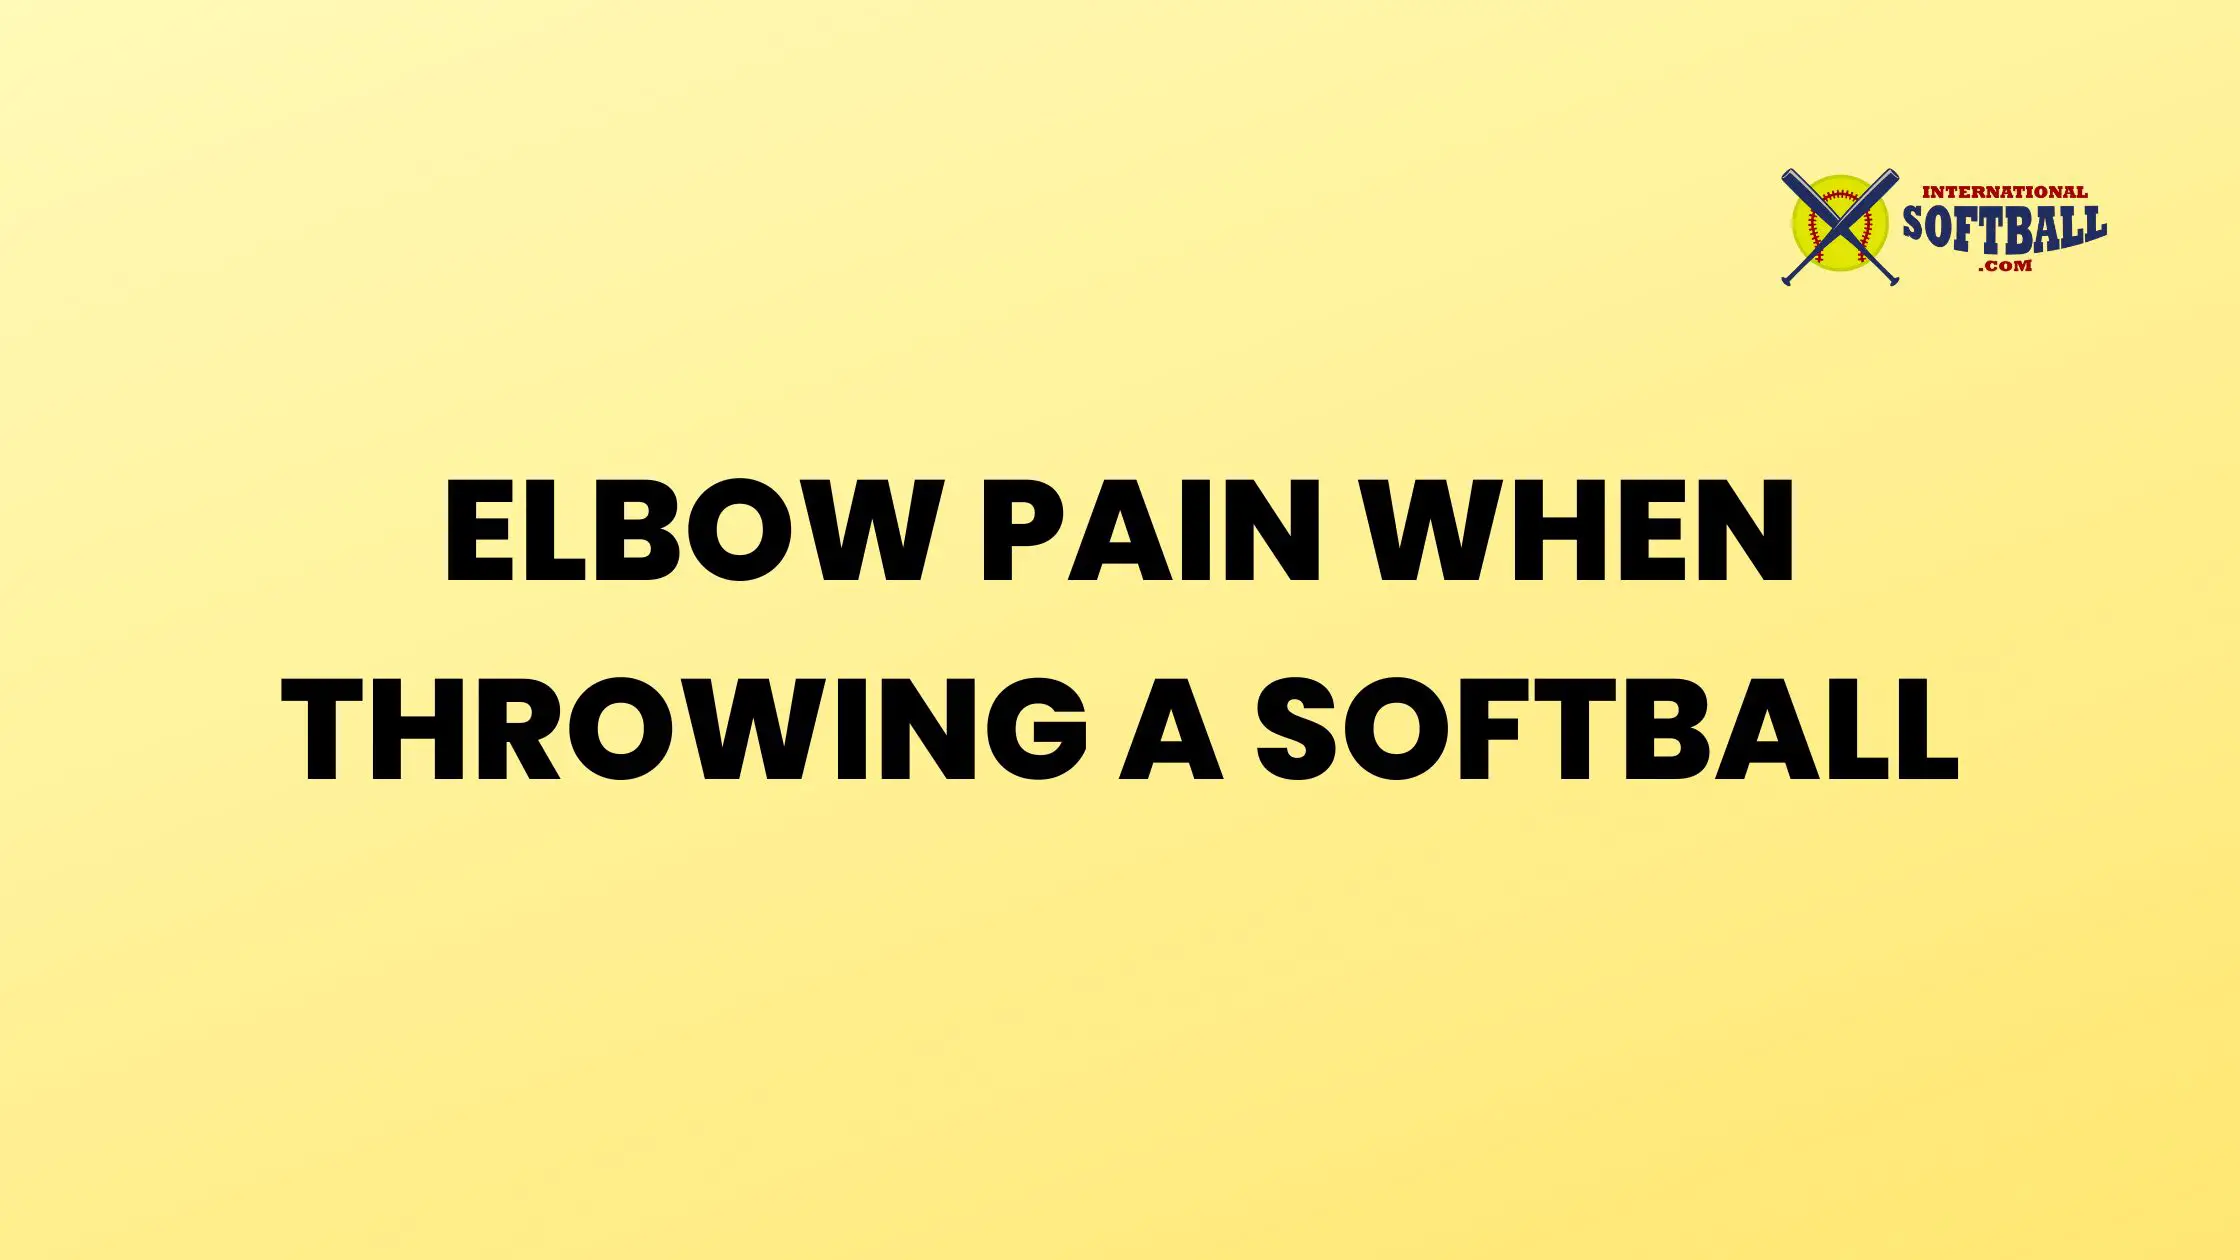 ELBOW PAIN WHEN THROWING A SOFTBALL